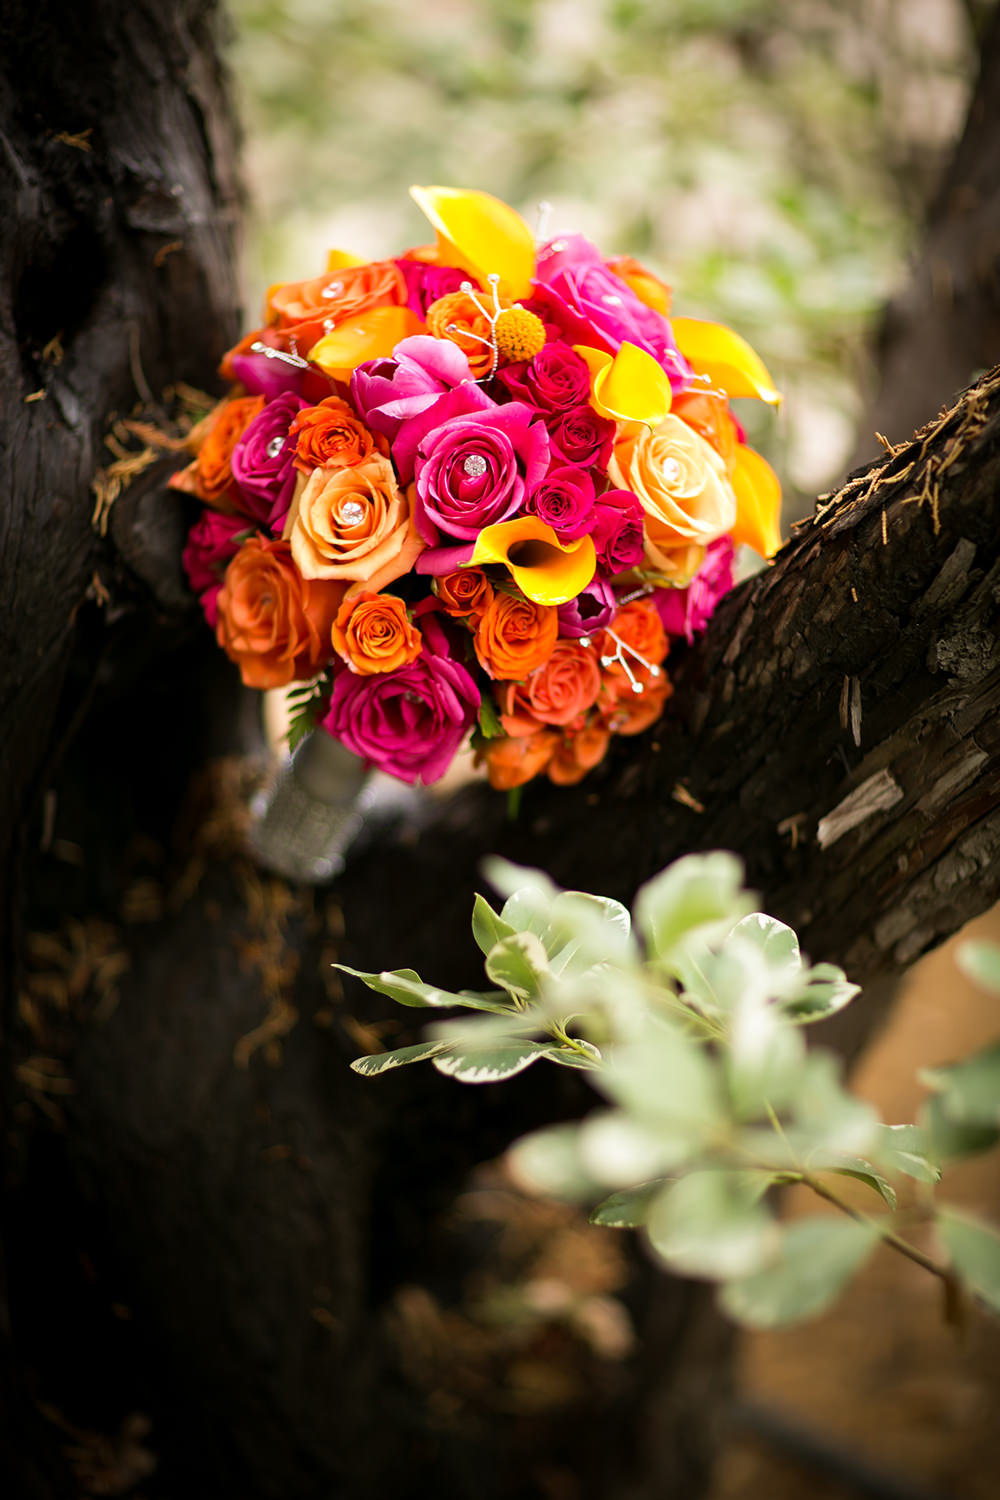 stunning bouquet image at leoness cellars